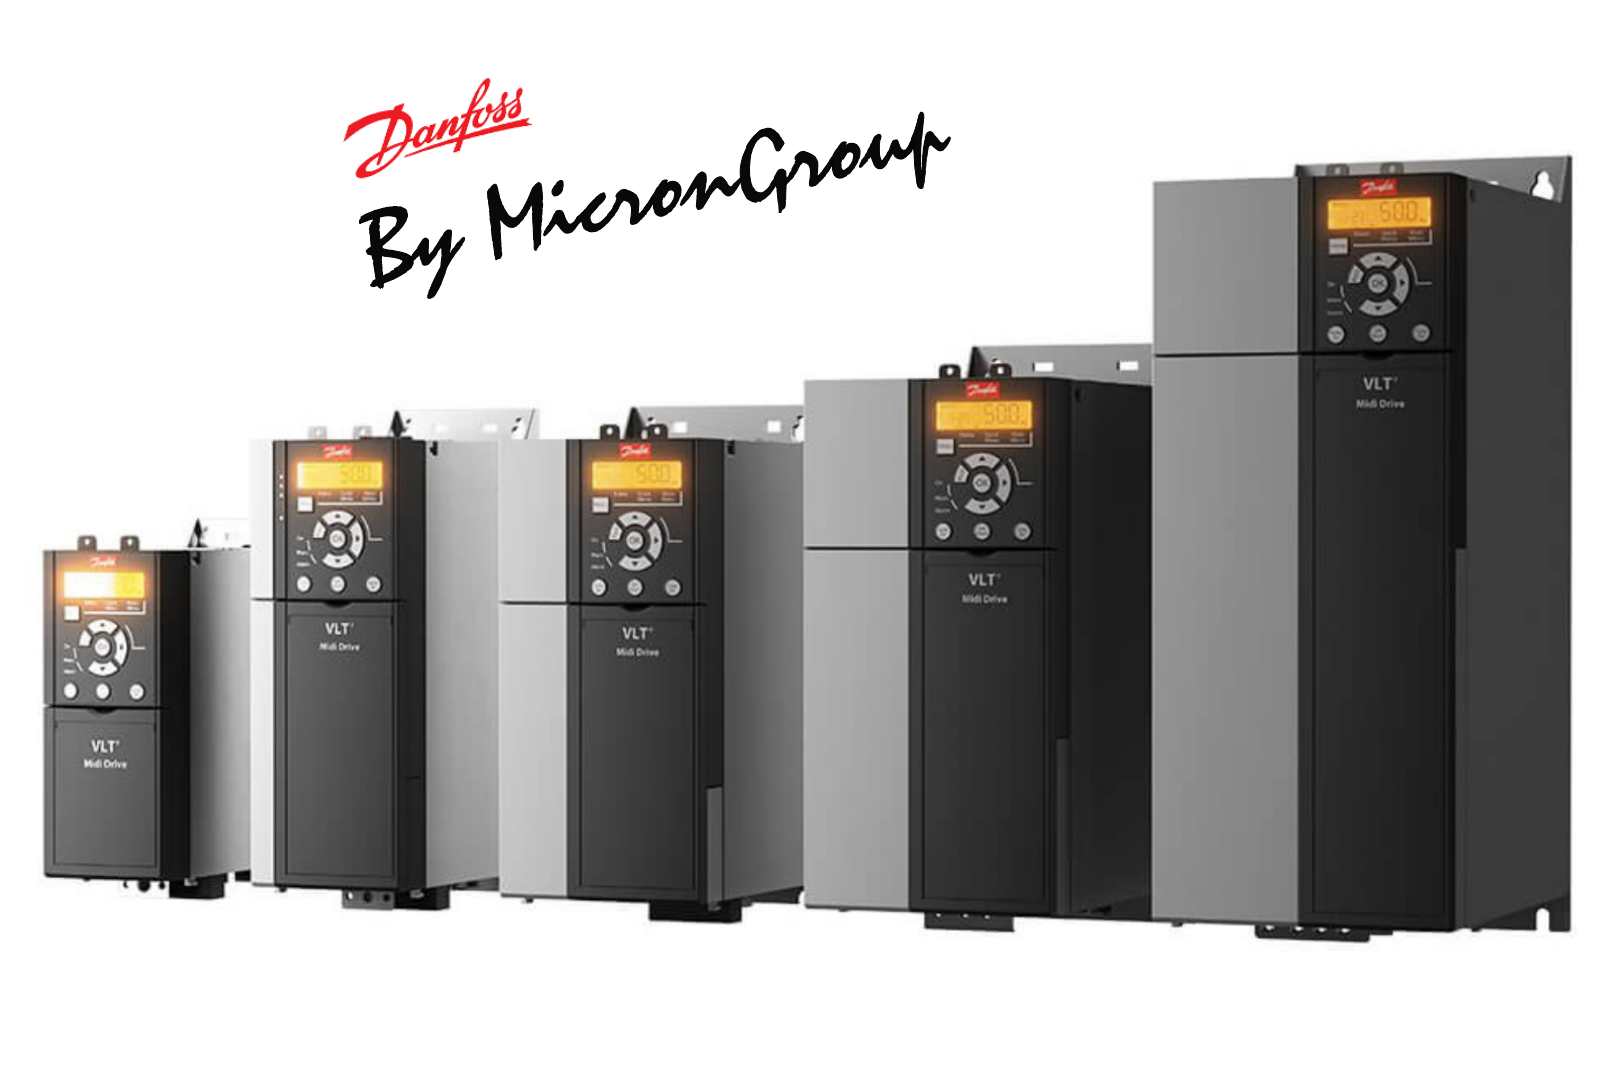 microngroup-variable-speed-drives-danfoss-range-of-microdrives-by-microngroup